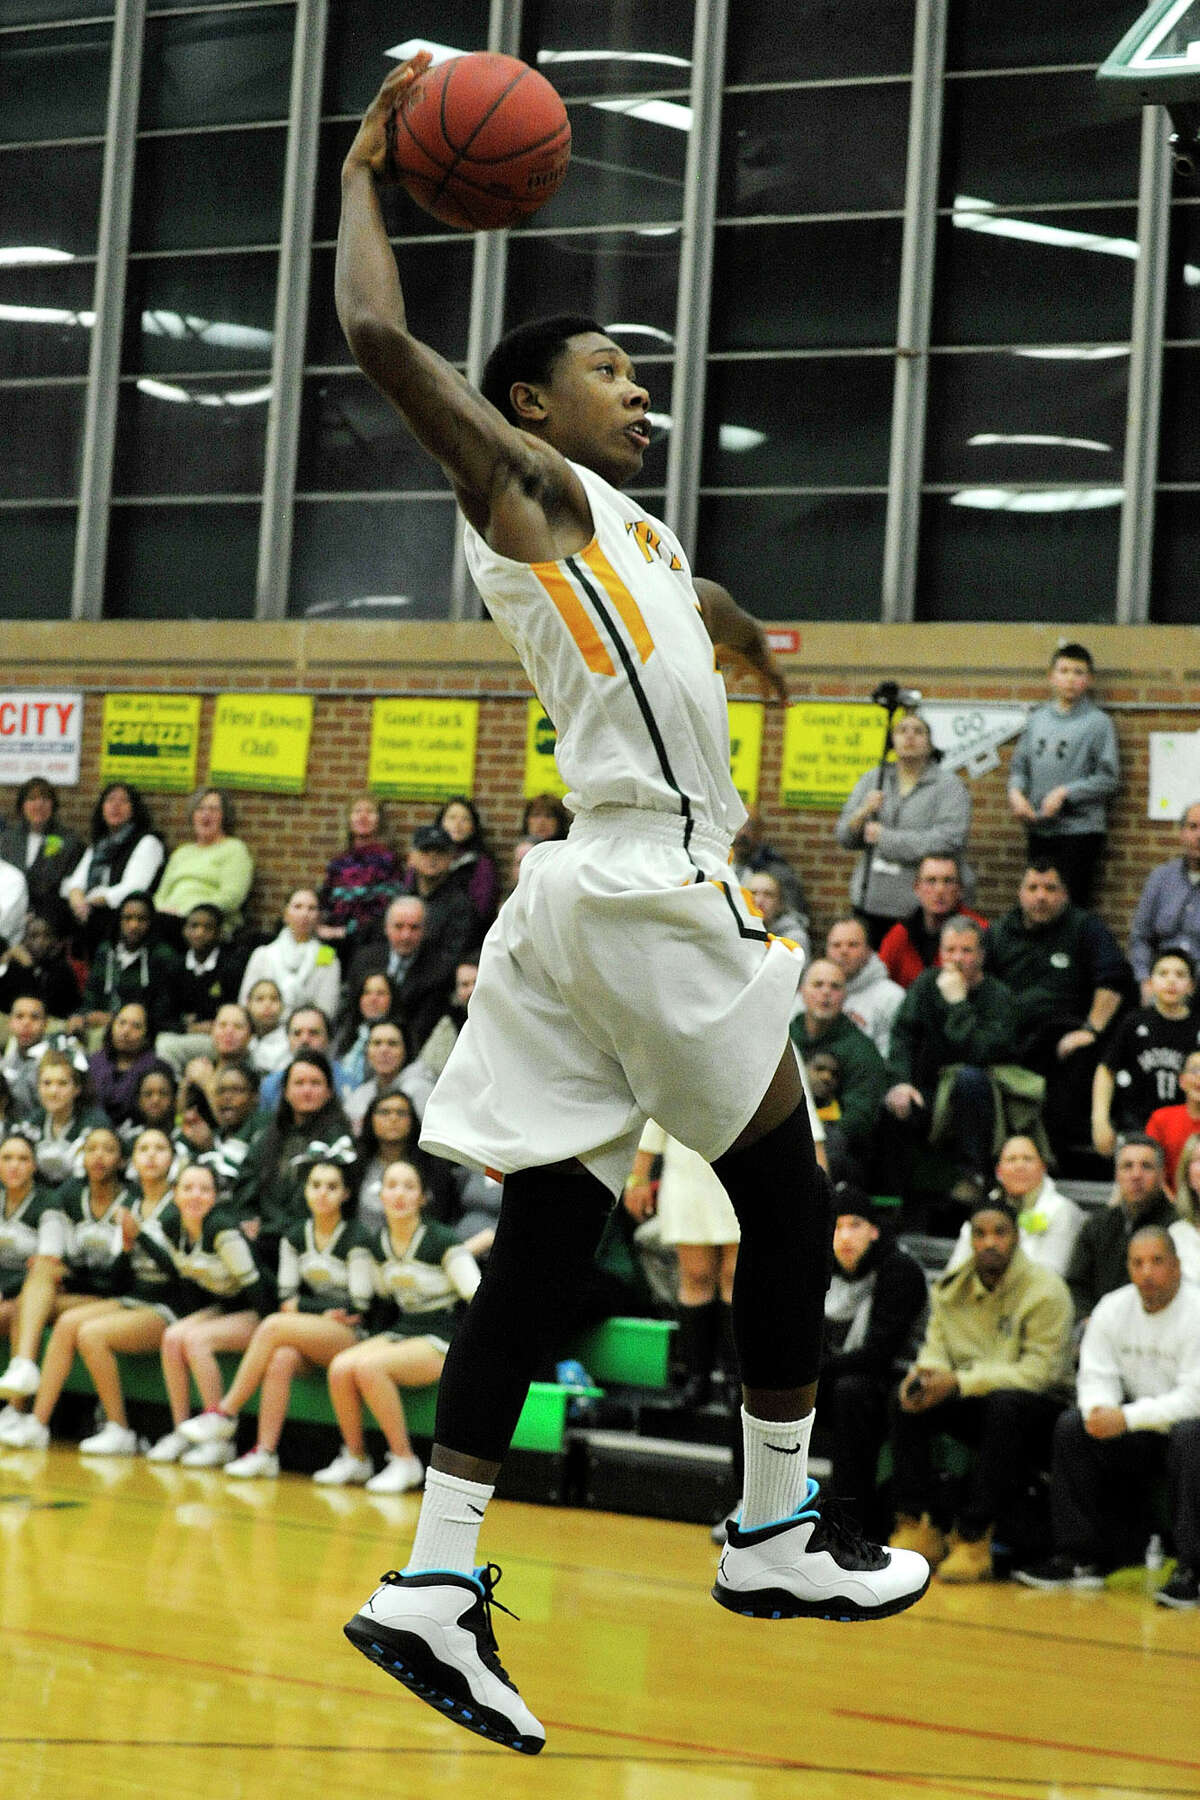 Trinity Catholic's Tremaine Fraiser dunks the ball during their game against Westhill at Trinity Catholic High School in Stamford, Conn., on Wednesday, Feb. 26, 2014. Westhill won, 67-63.